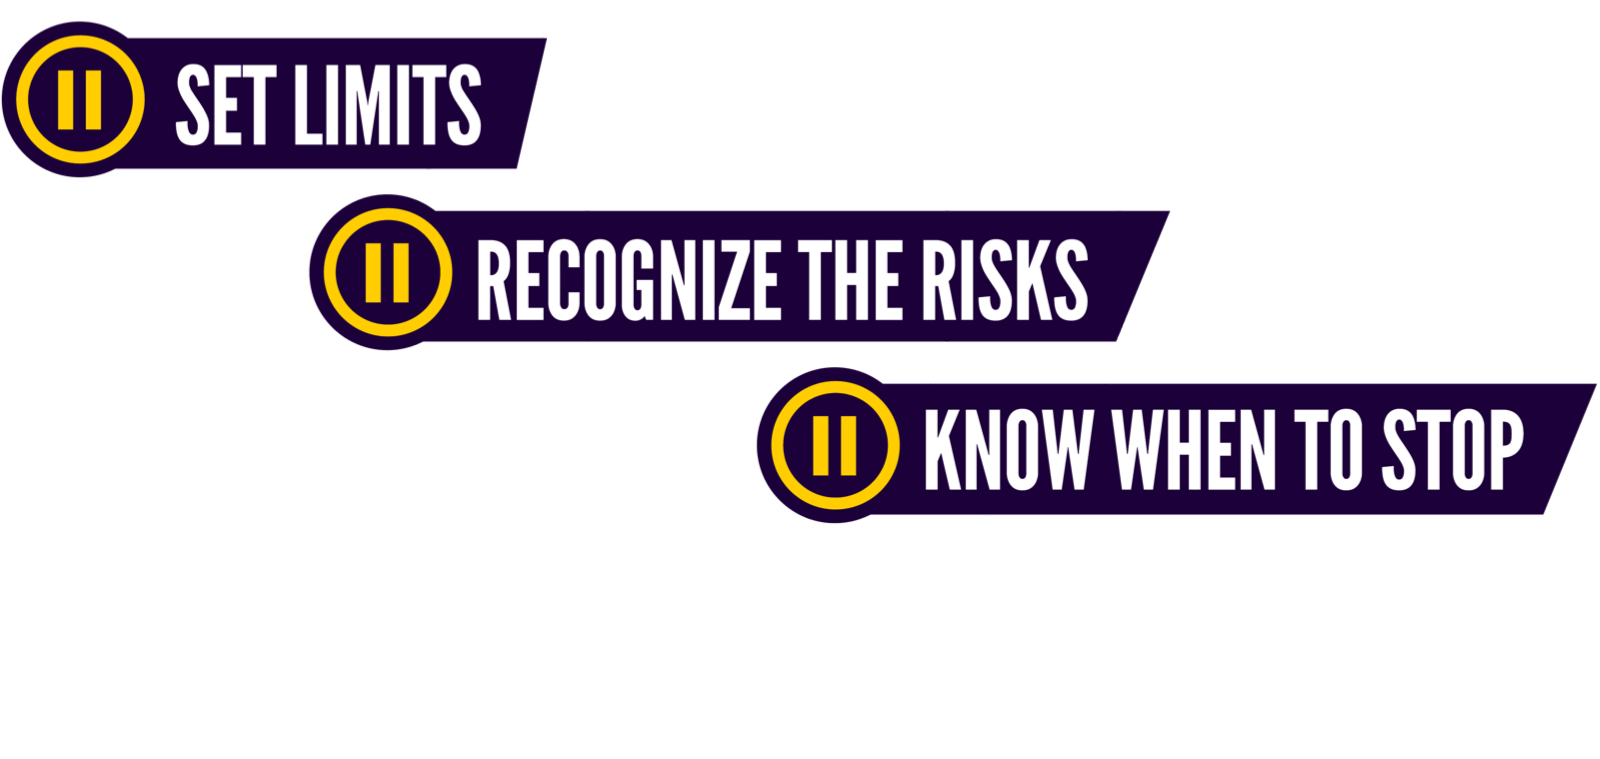 Set Limits. Recognize the Risks. Know When to Stop.